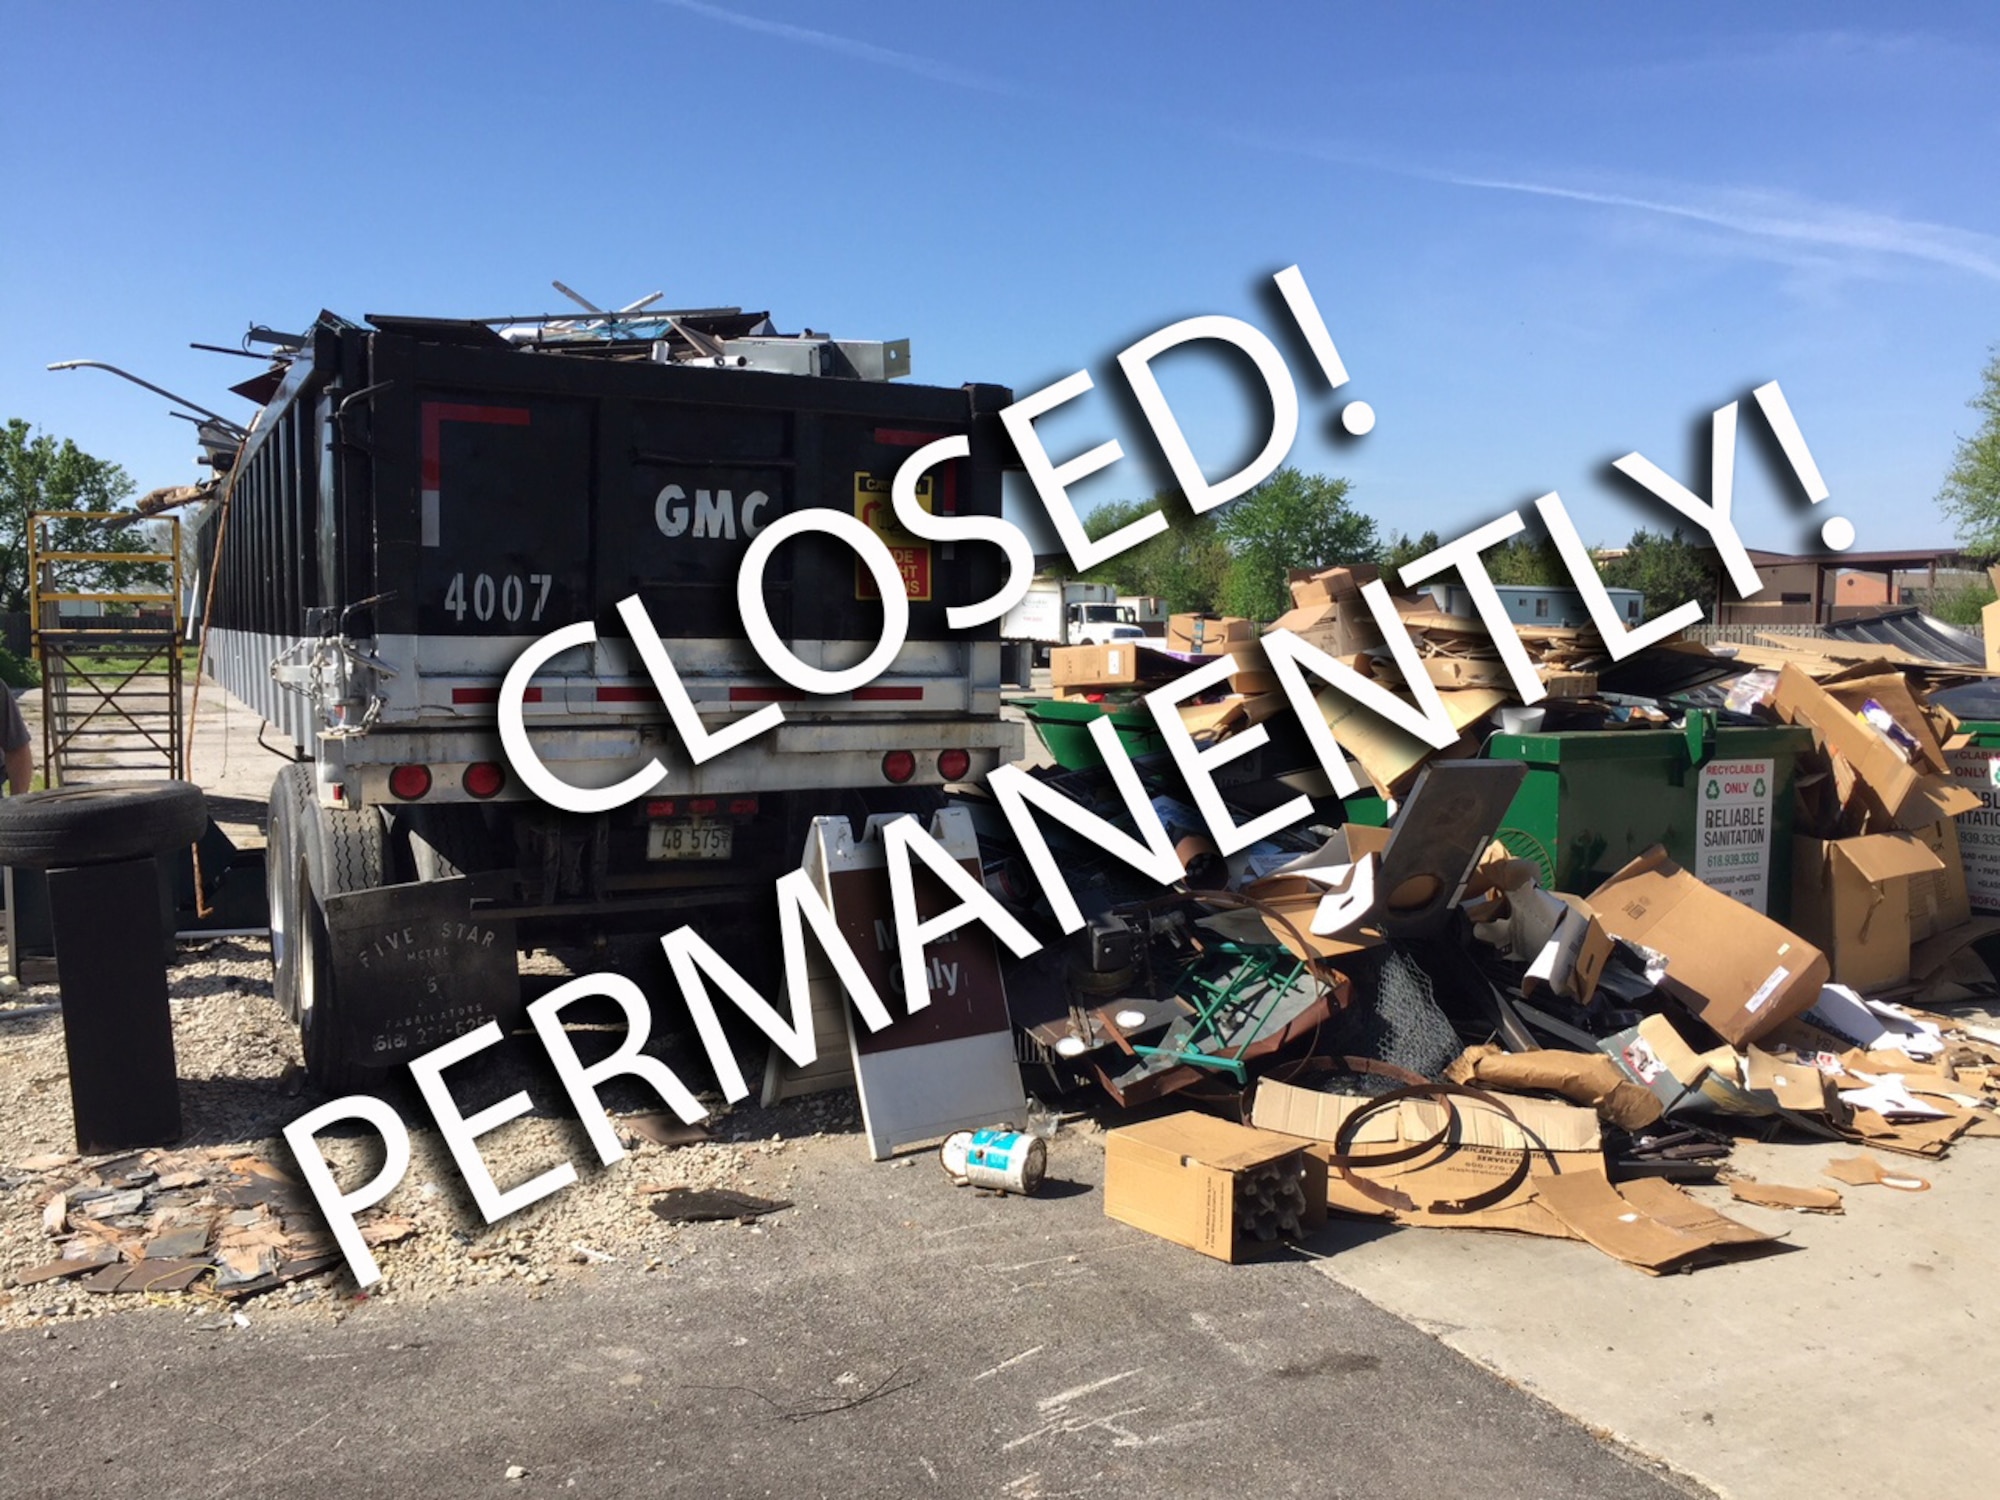 The Scott AFB Recycling Center is now closed permanently.